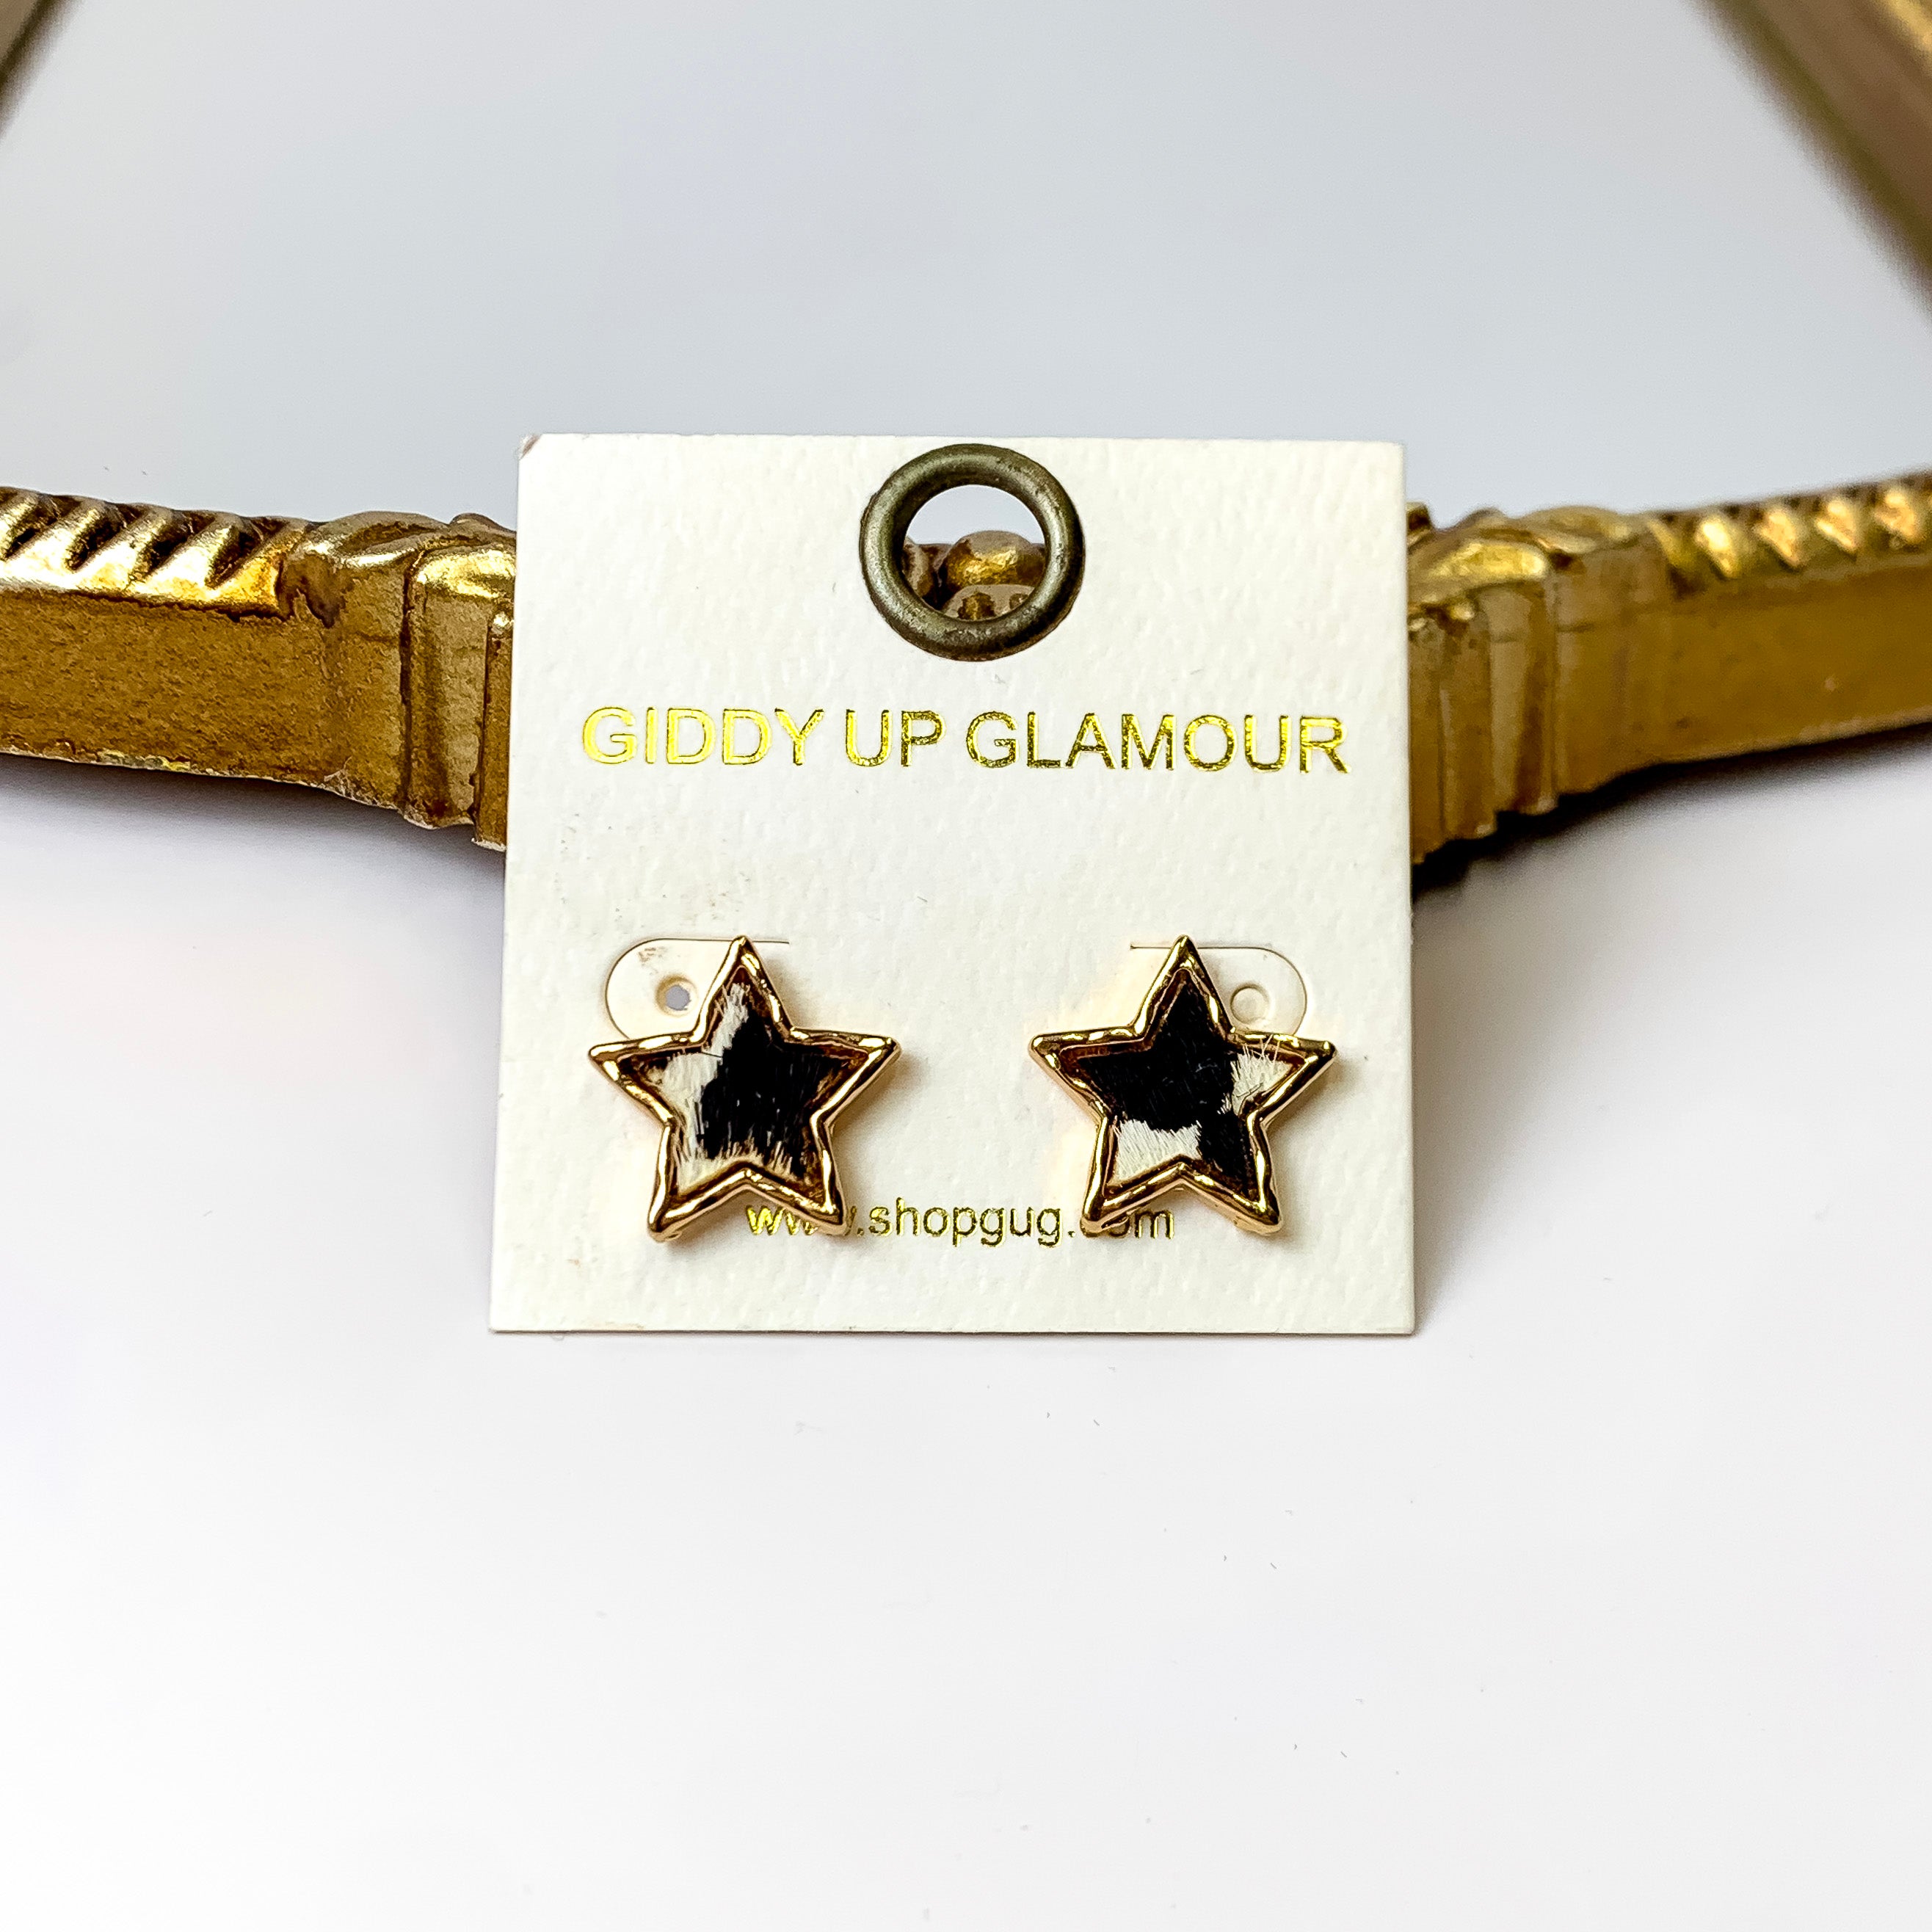 Lost in the Stars Stud Earrings in Cow Print - Giddy Up Glamour Boutique